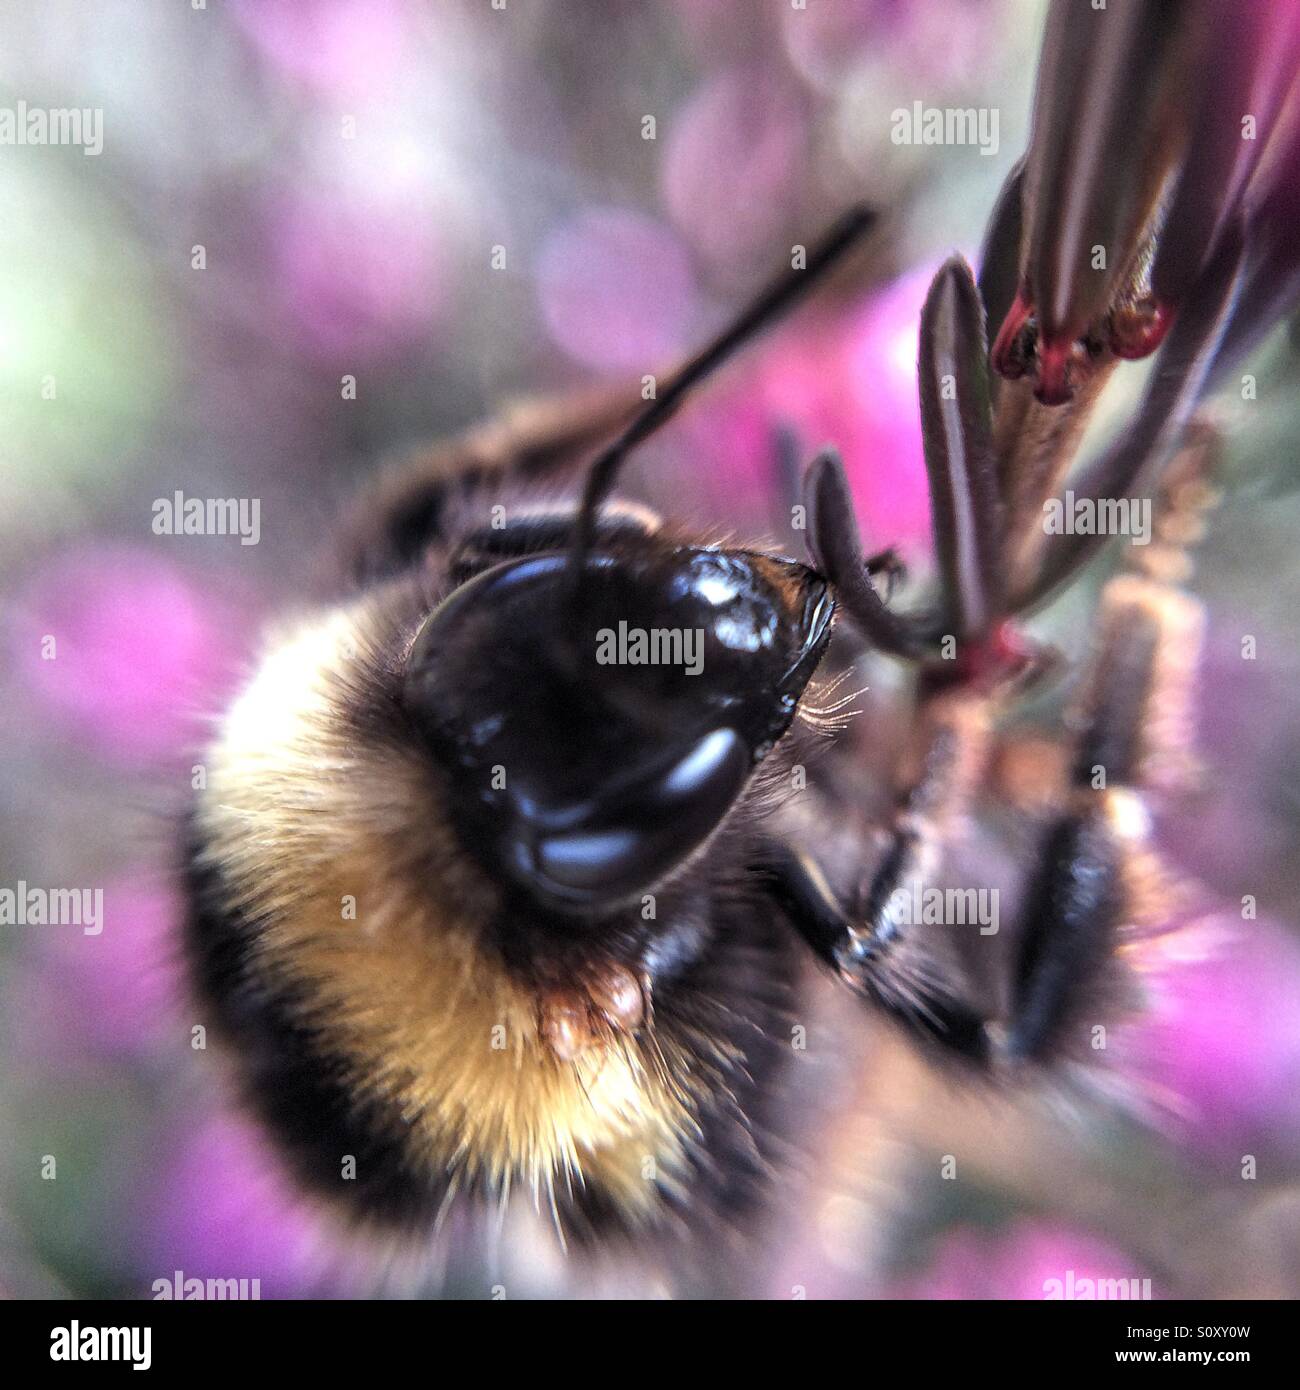 Bumble bee on flower Stock Photo